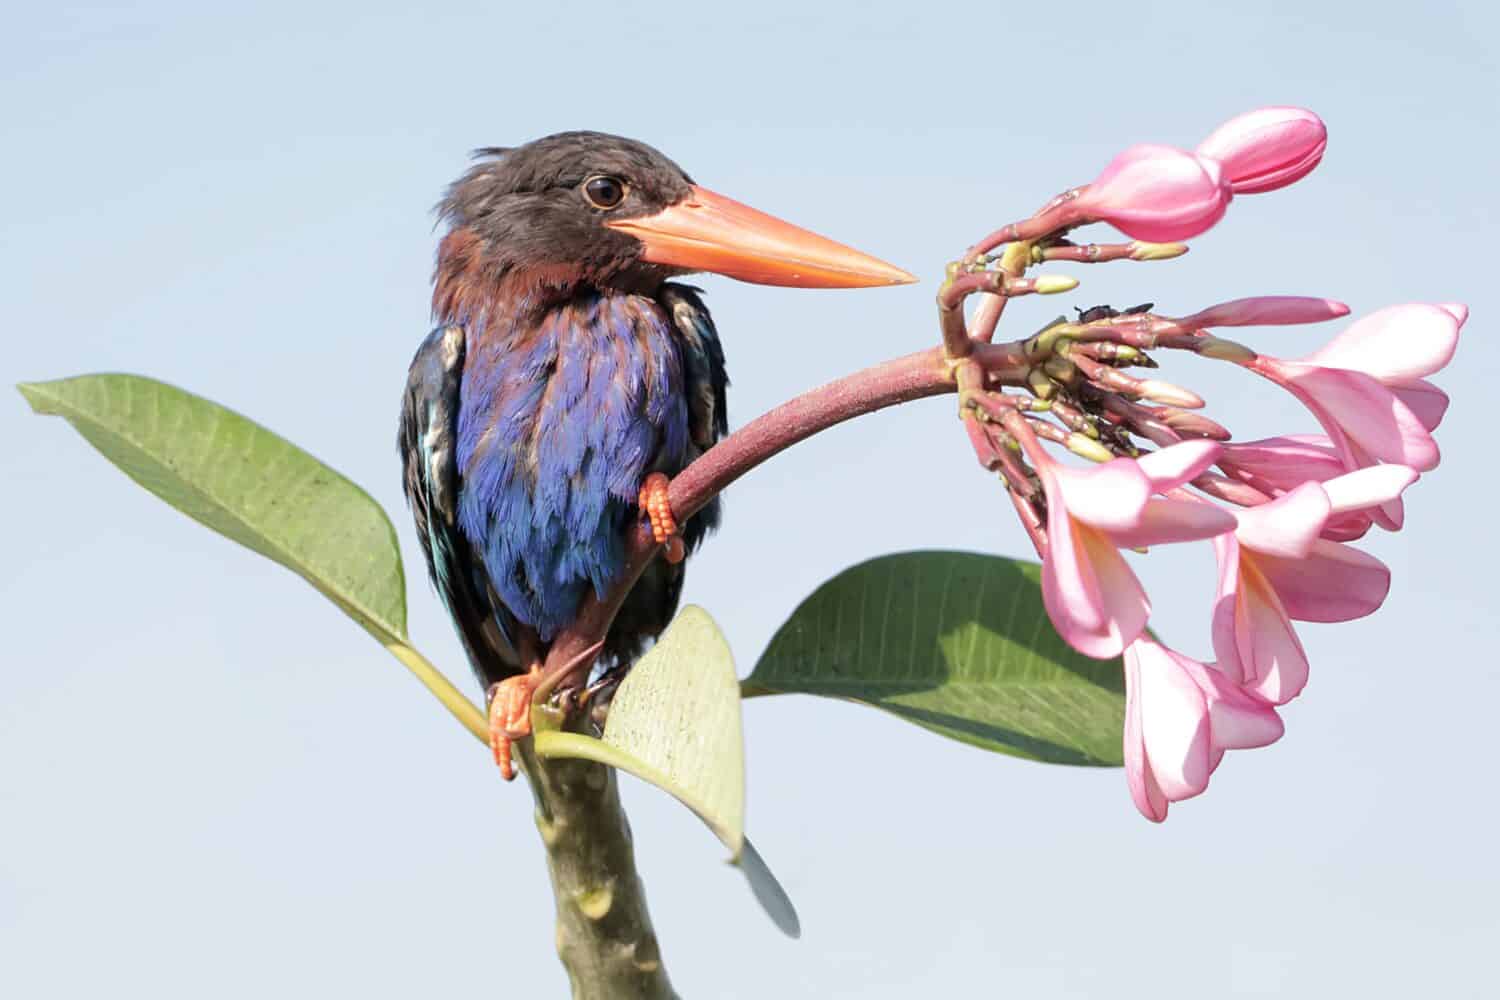 A Javan kingfisher perched on a frangipani flower branch. This predatory bird has the scientific name Halcyon cyanoventris.